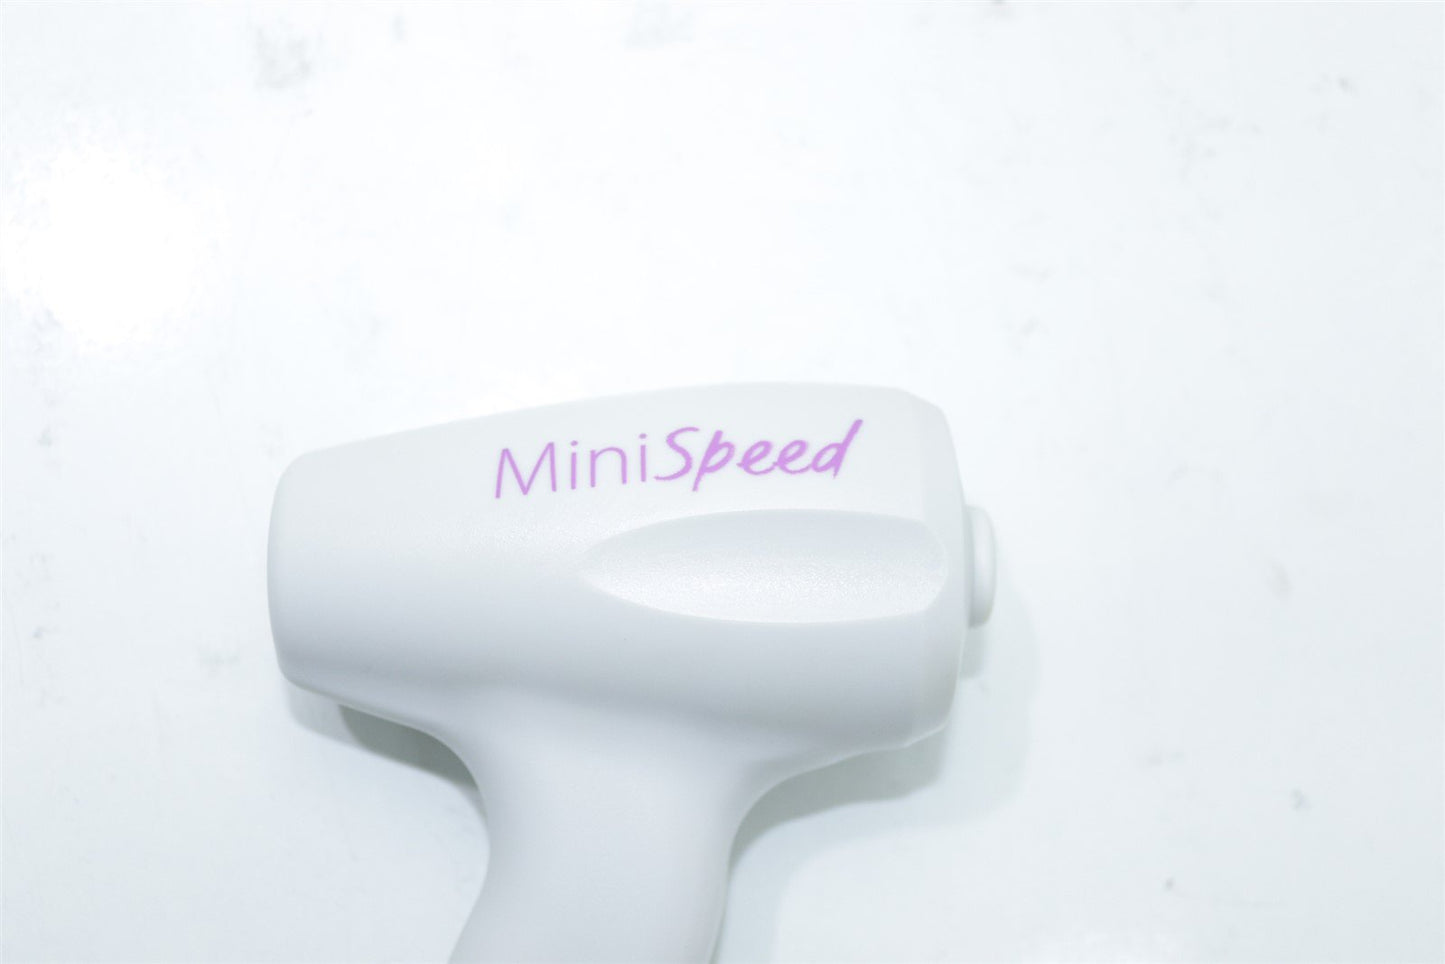 Alma Lasers Accent Prime MiniSpeed Handpiece Plastic Cover No Trigger Used